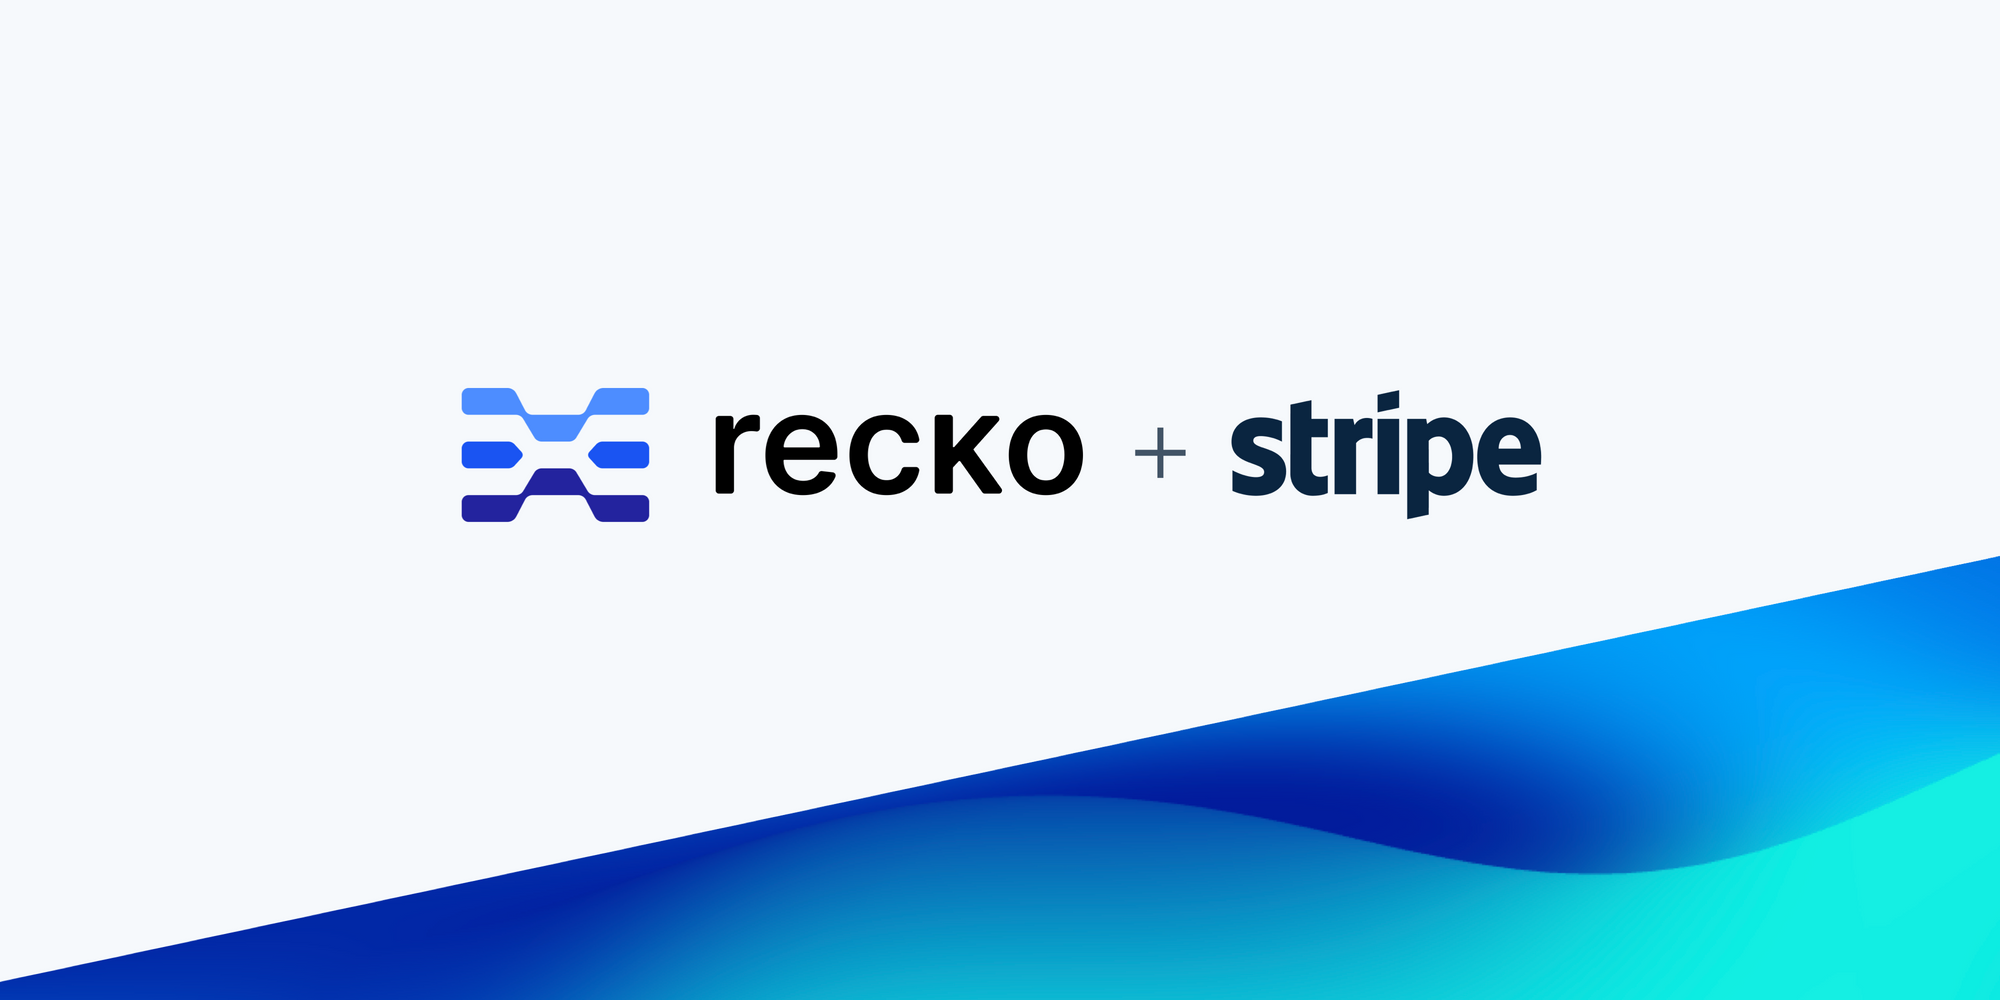 Recko will join Stripe to bring more revenue and finance management tools to global internet companies